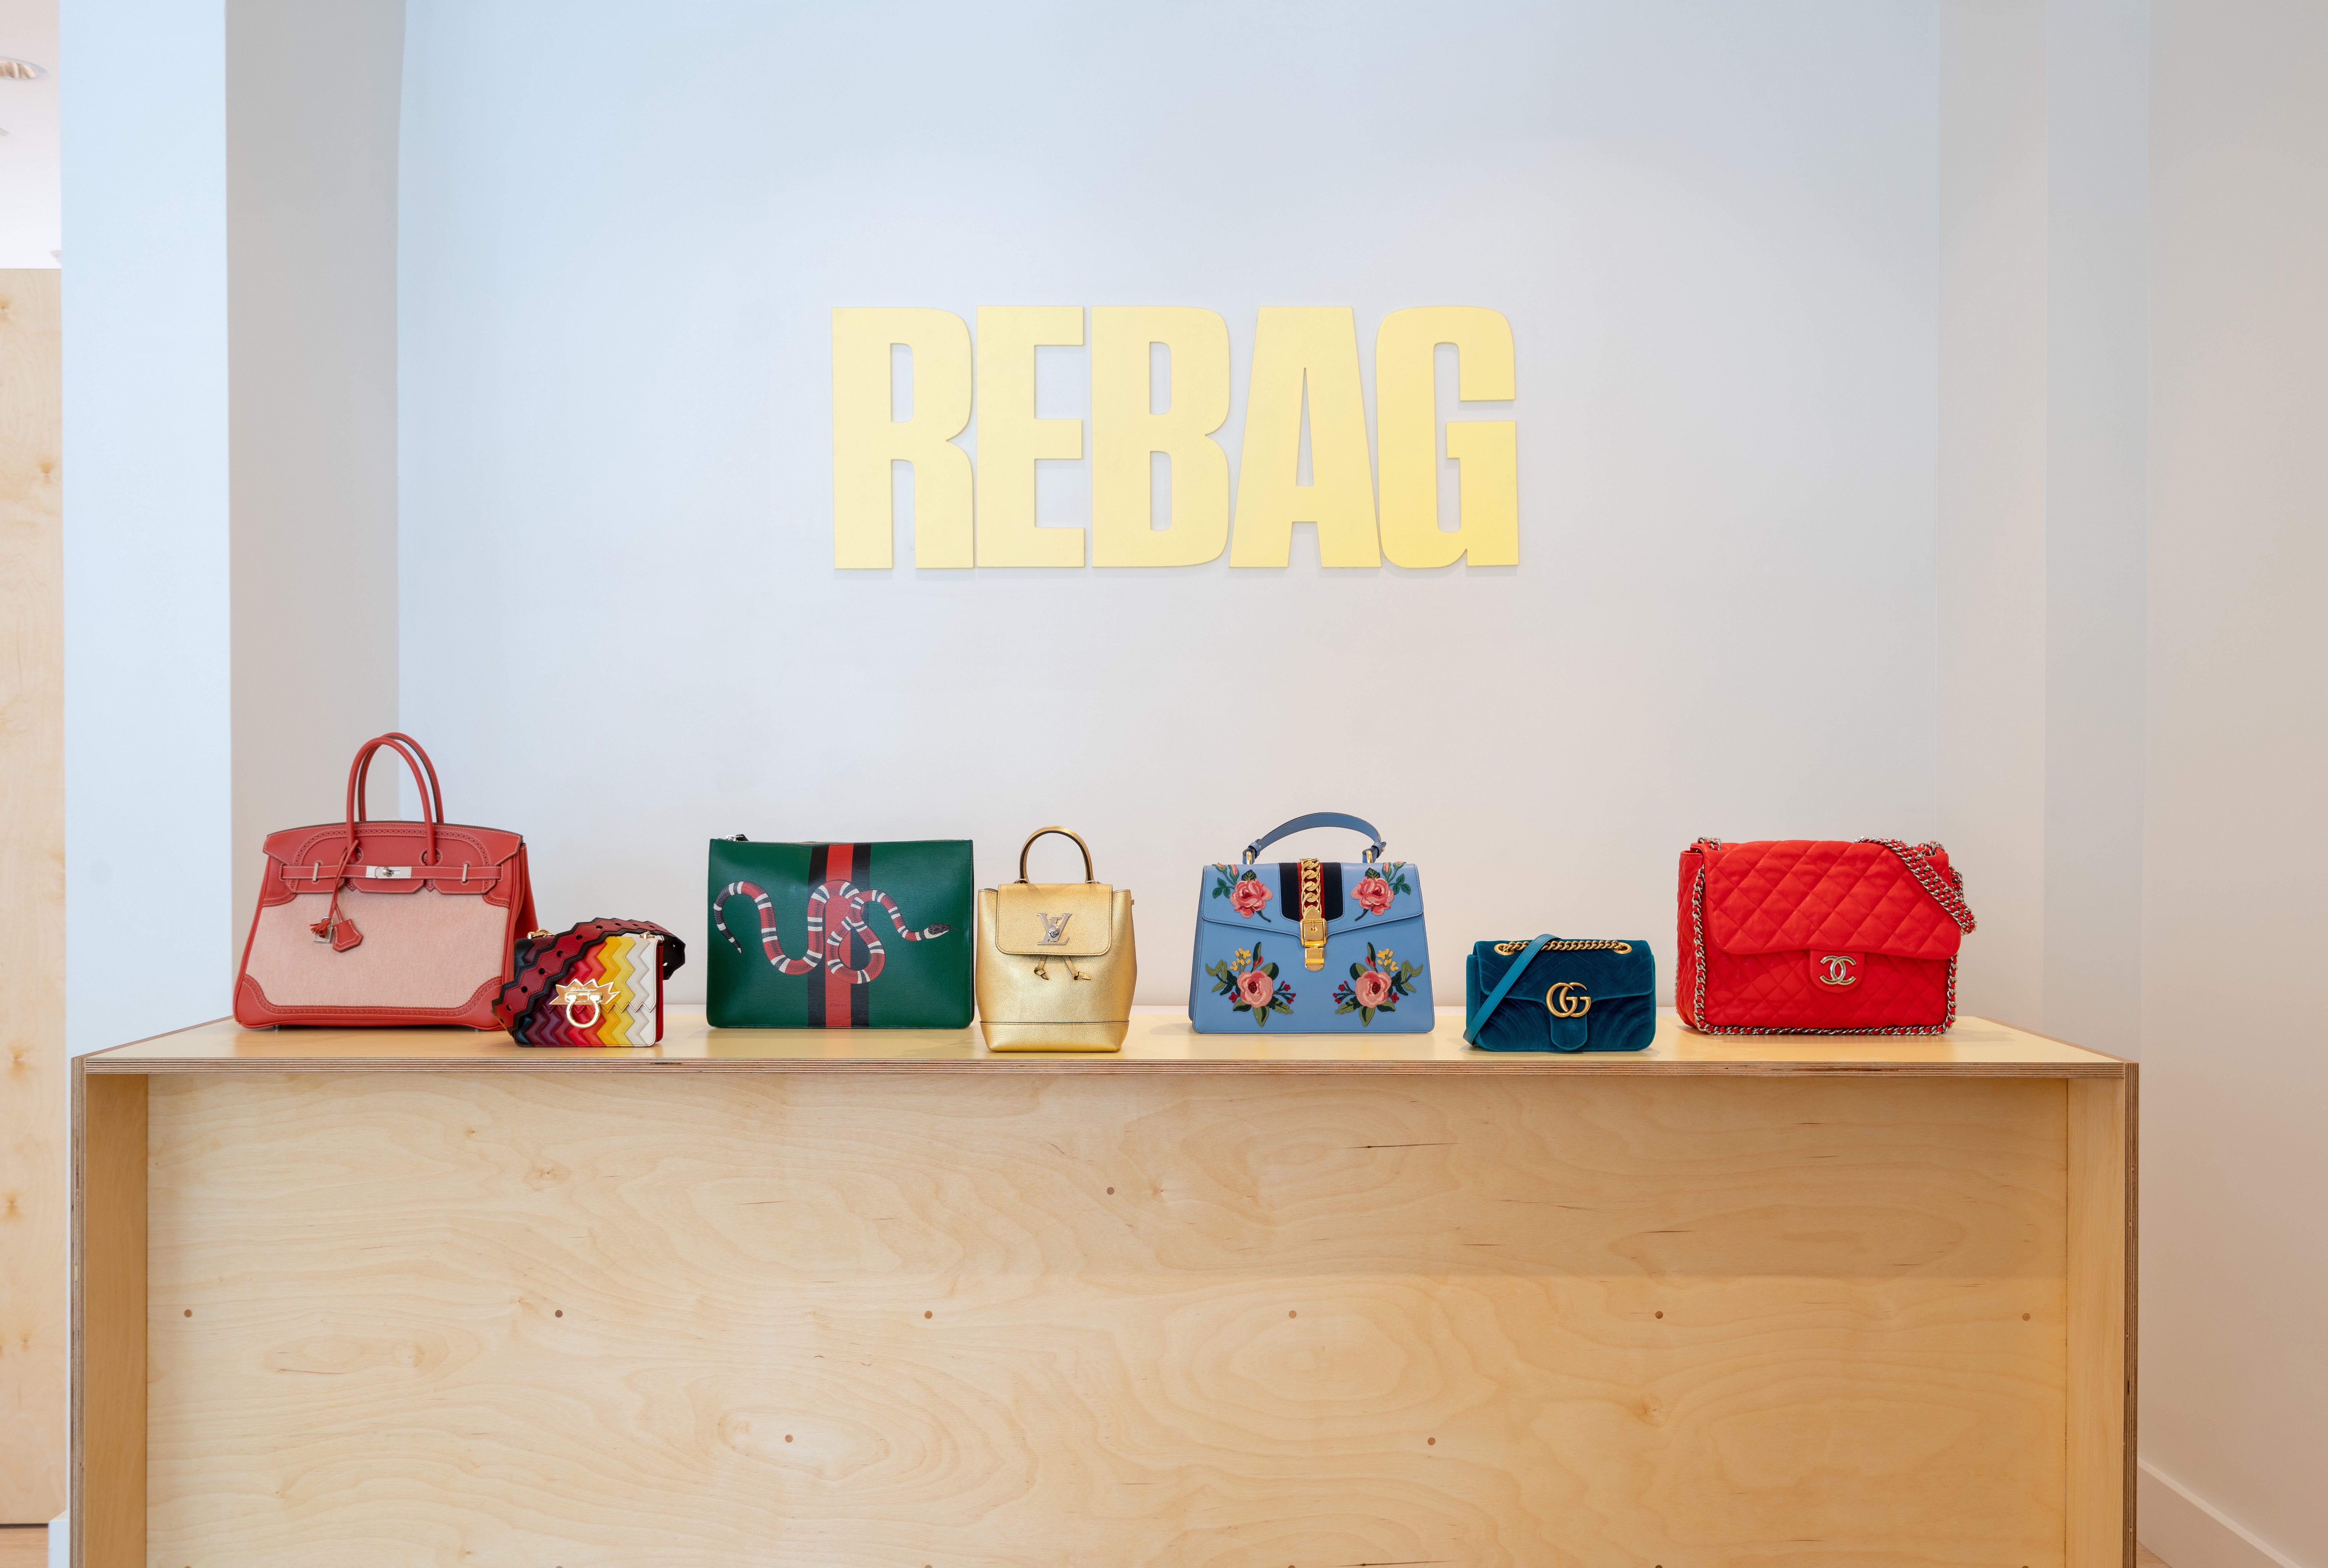 Rebag Newest Launch Is A Lesson in Handbags 101